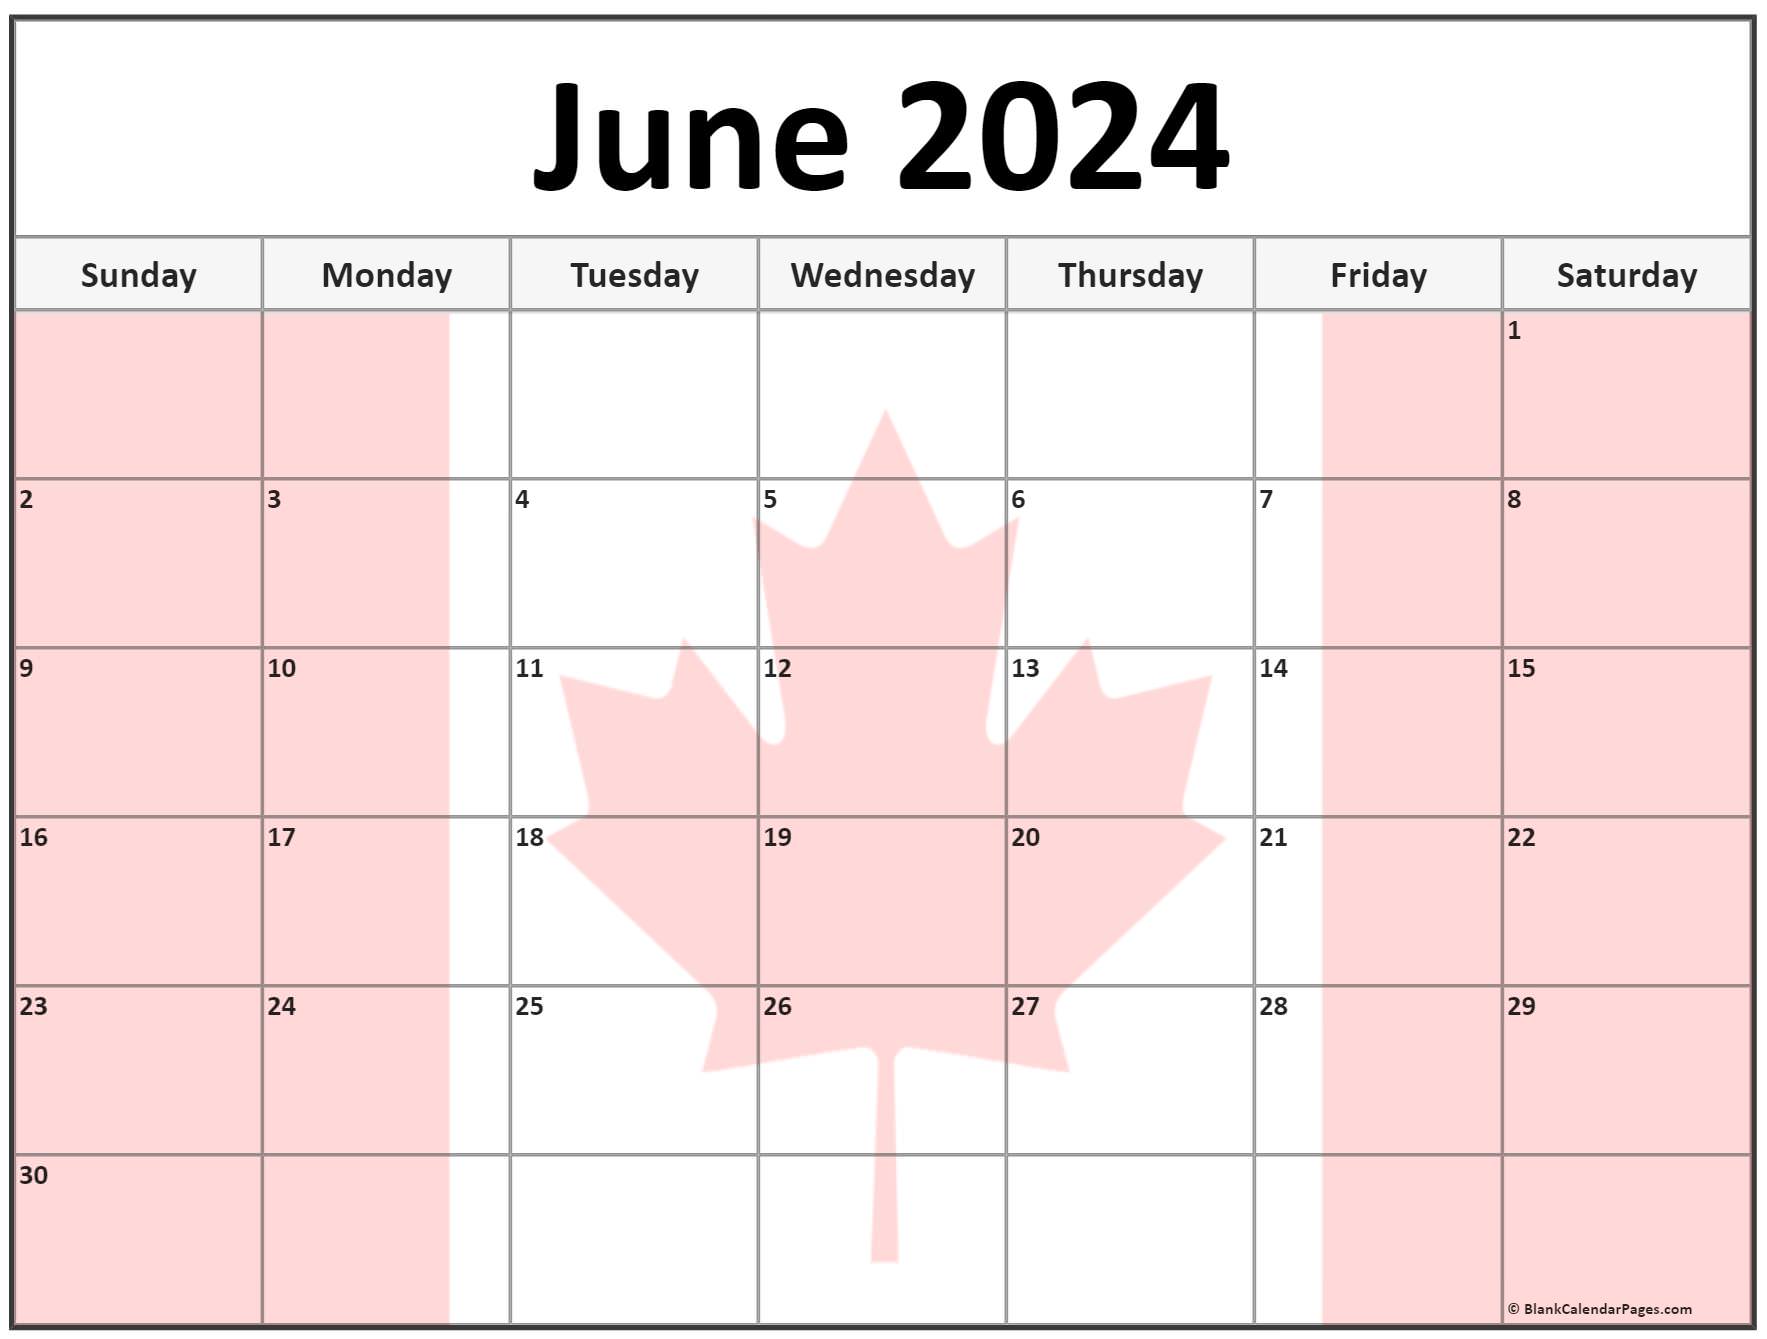 collection-of-june-2023-photo-calendars-with-image-filters